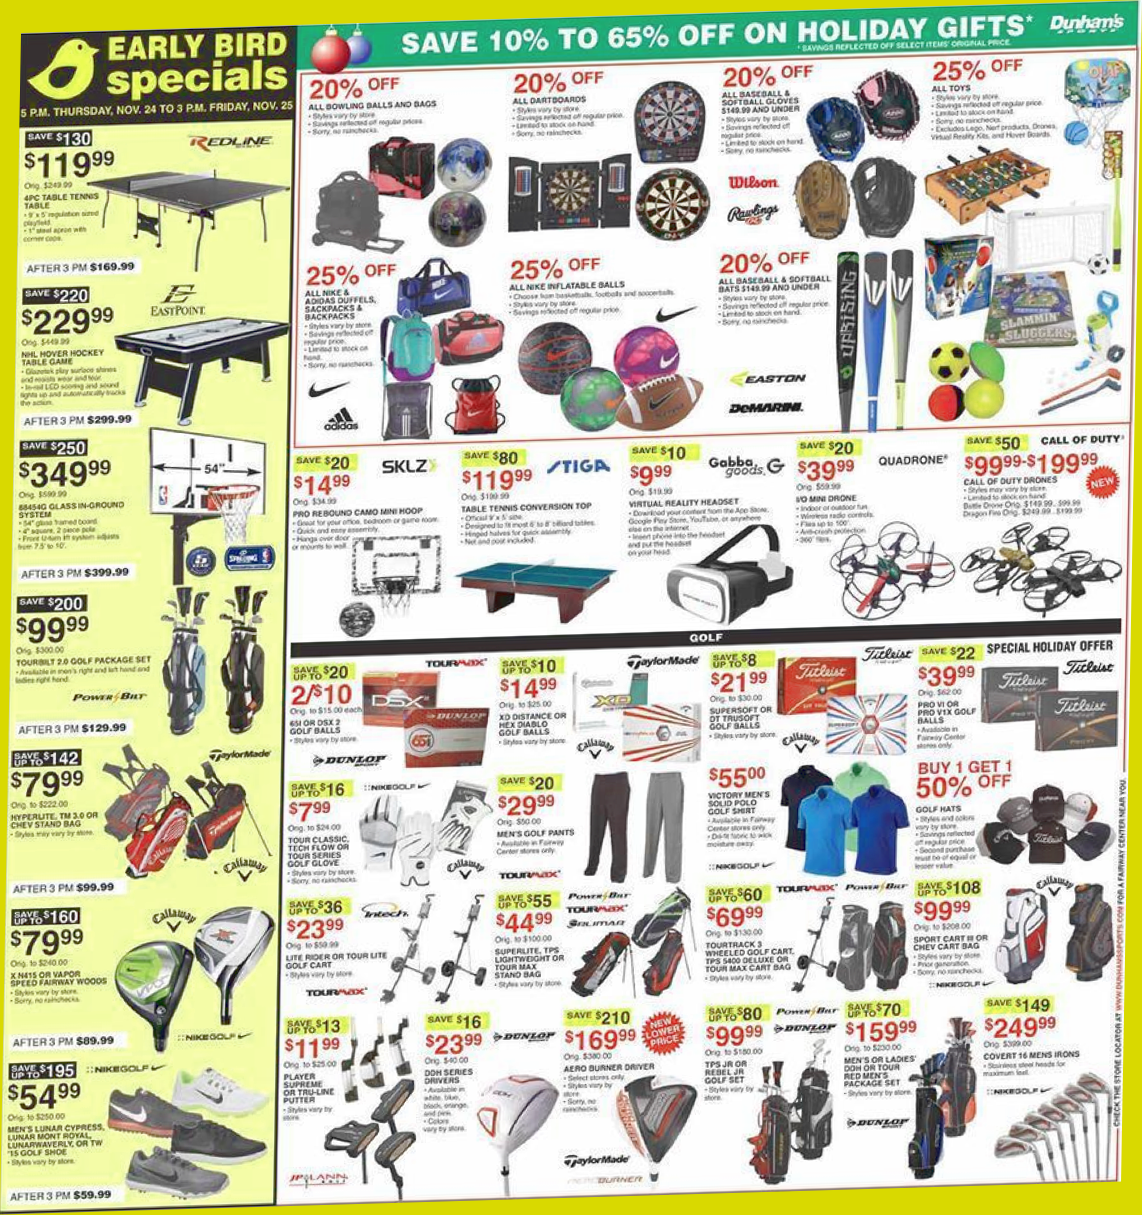 Dunham’s Sports Black Friday 2017 Sale & Ad Scan | Blacker Friday! - What Stores Haven't Leaked Their Black Friday Ad Yet